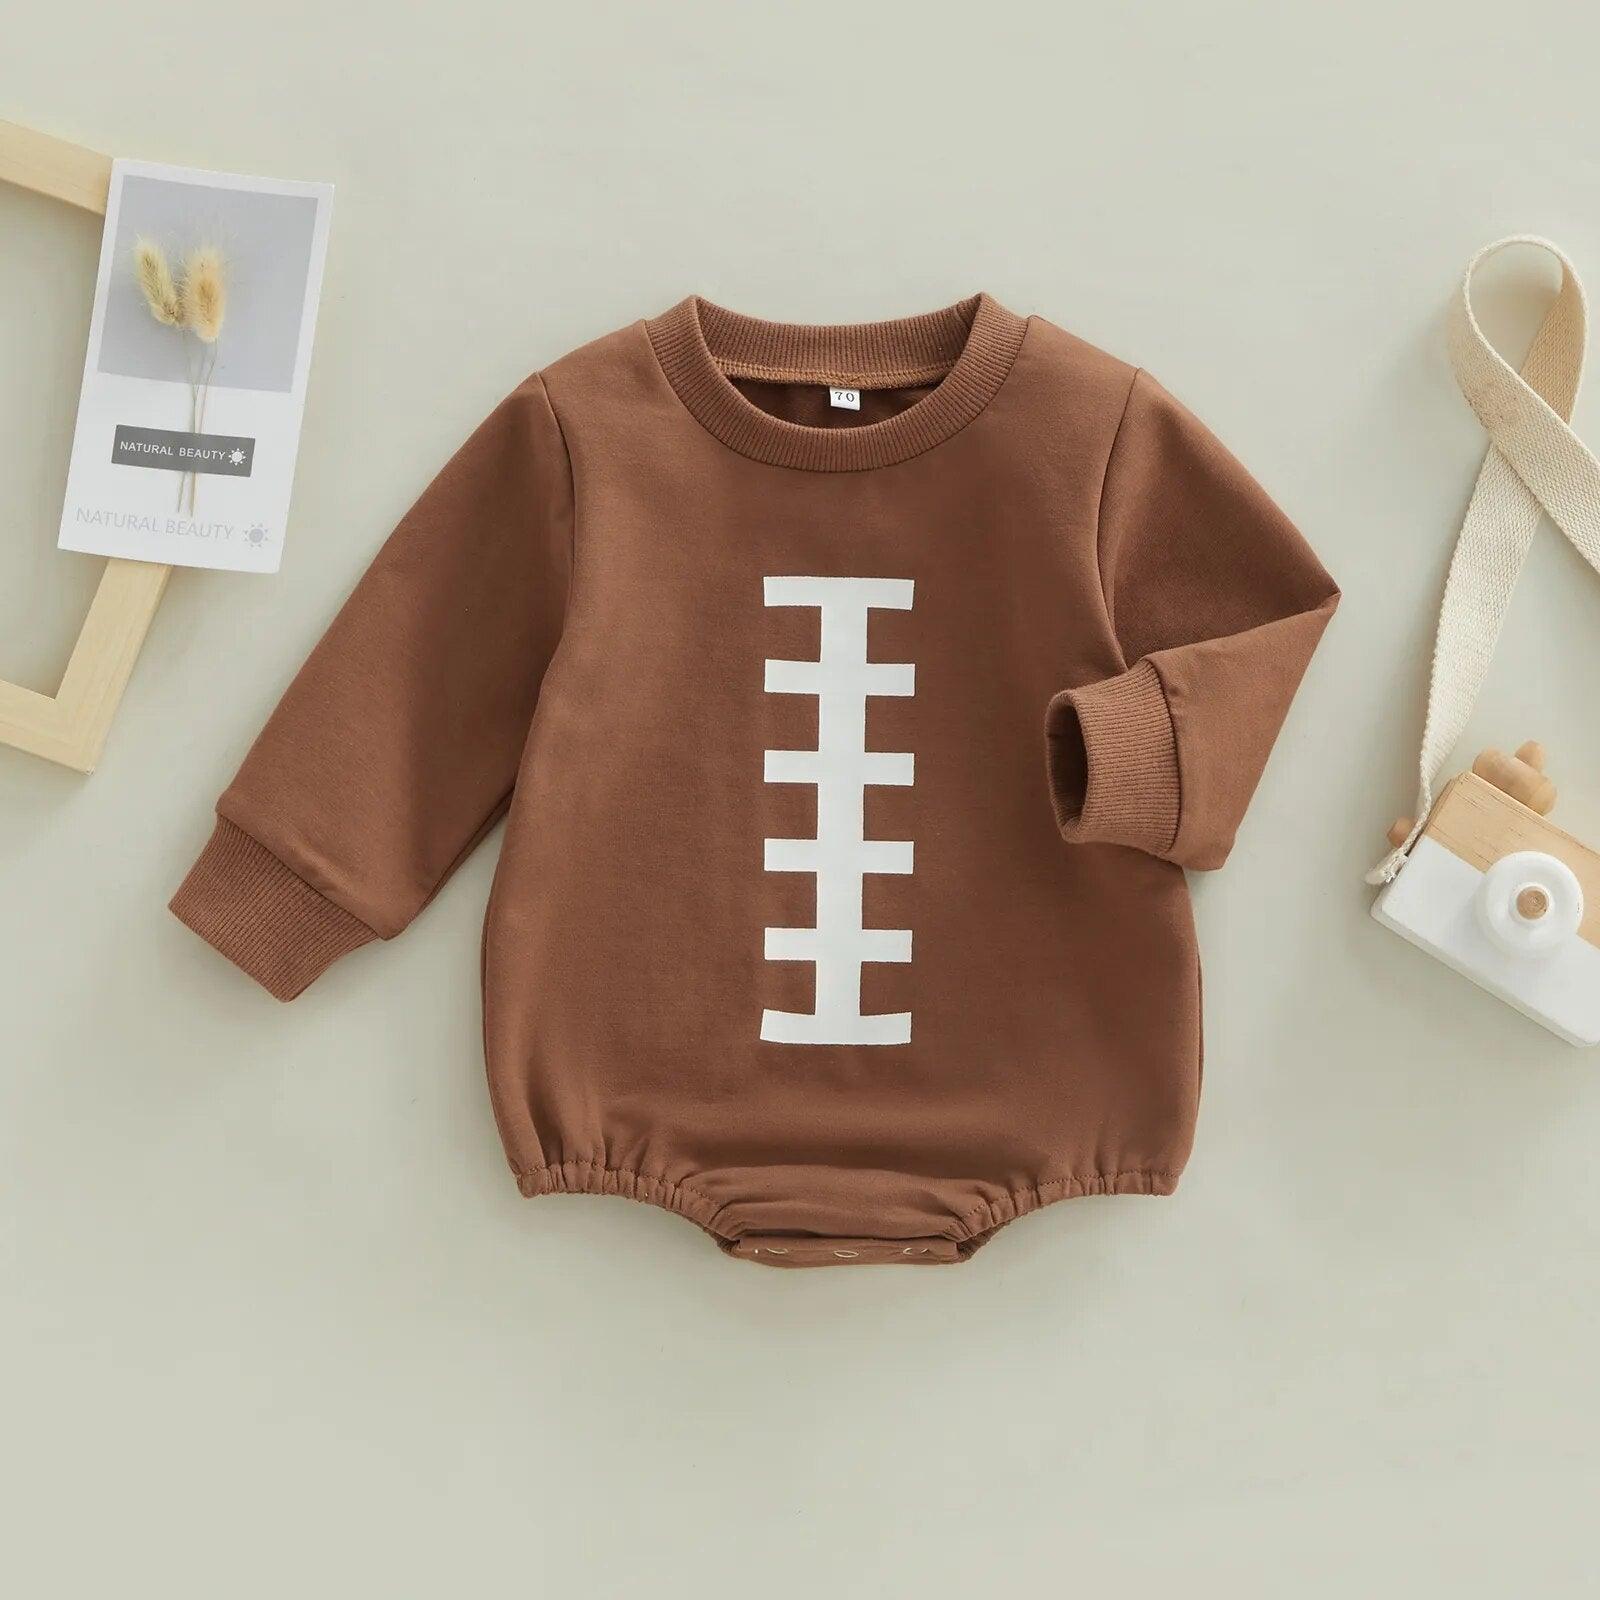 Baby Football Romper - Shop Baby Boutiques 